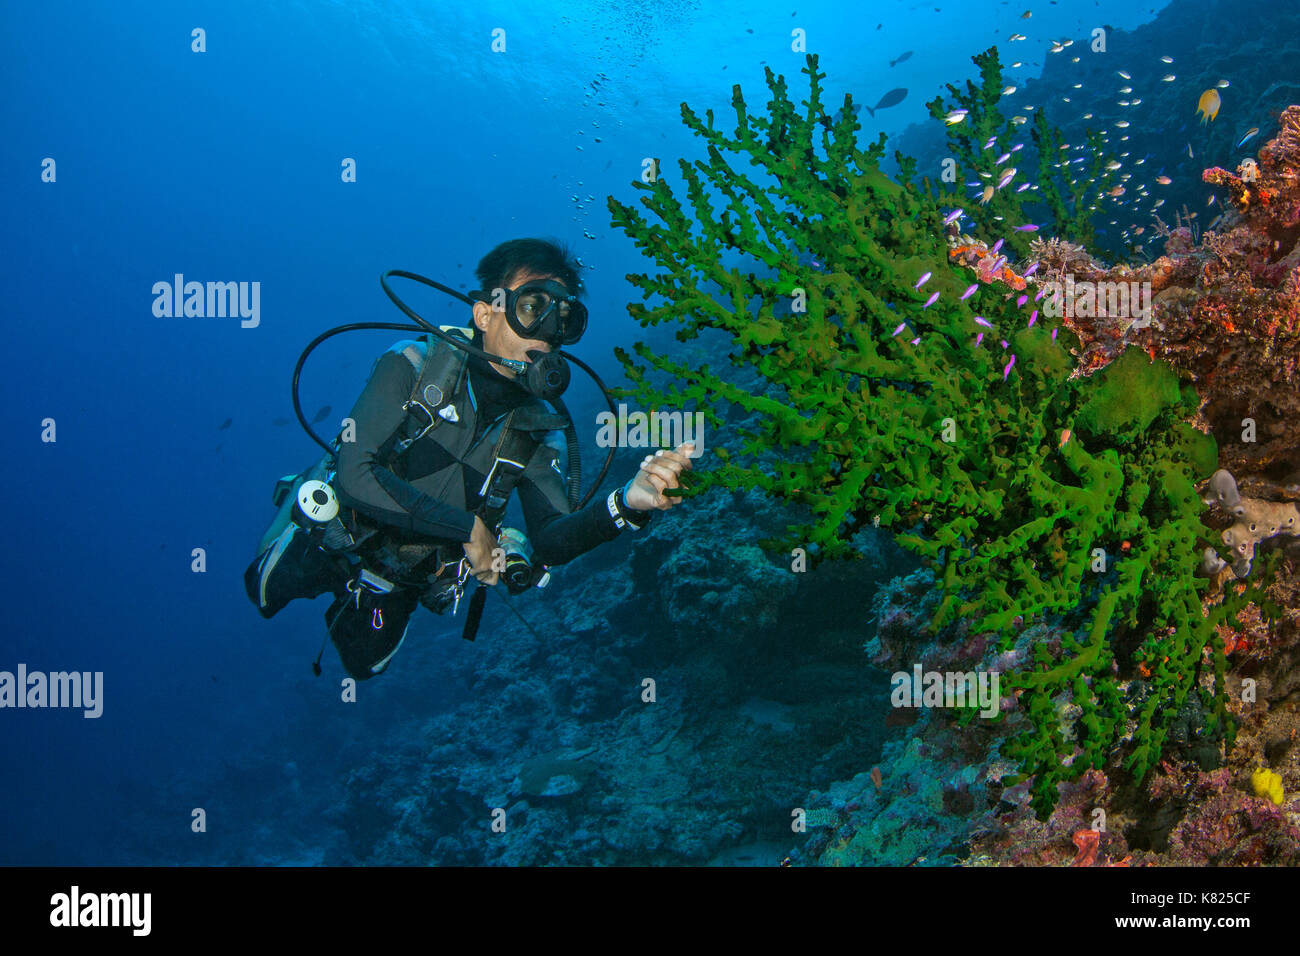 Malaysian dive master inspects green velvet coral (Acropora sp.) for commensal critters. Spratly Islands, South China Sea. Stock Photo